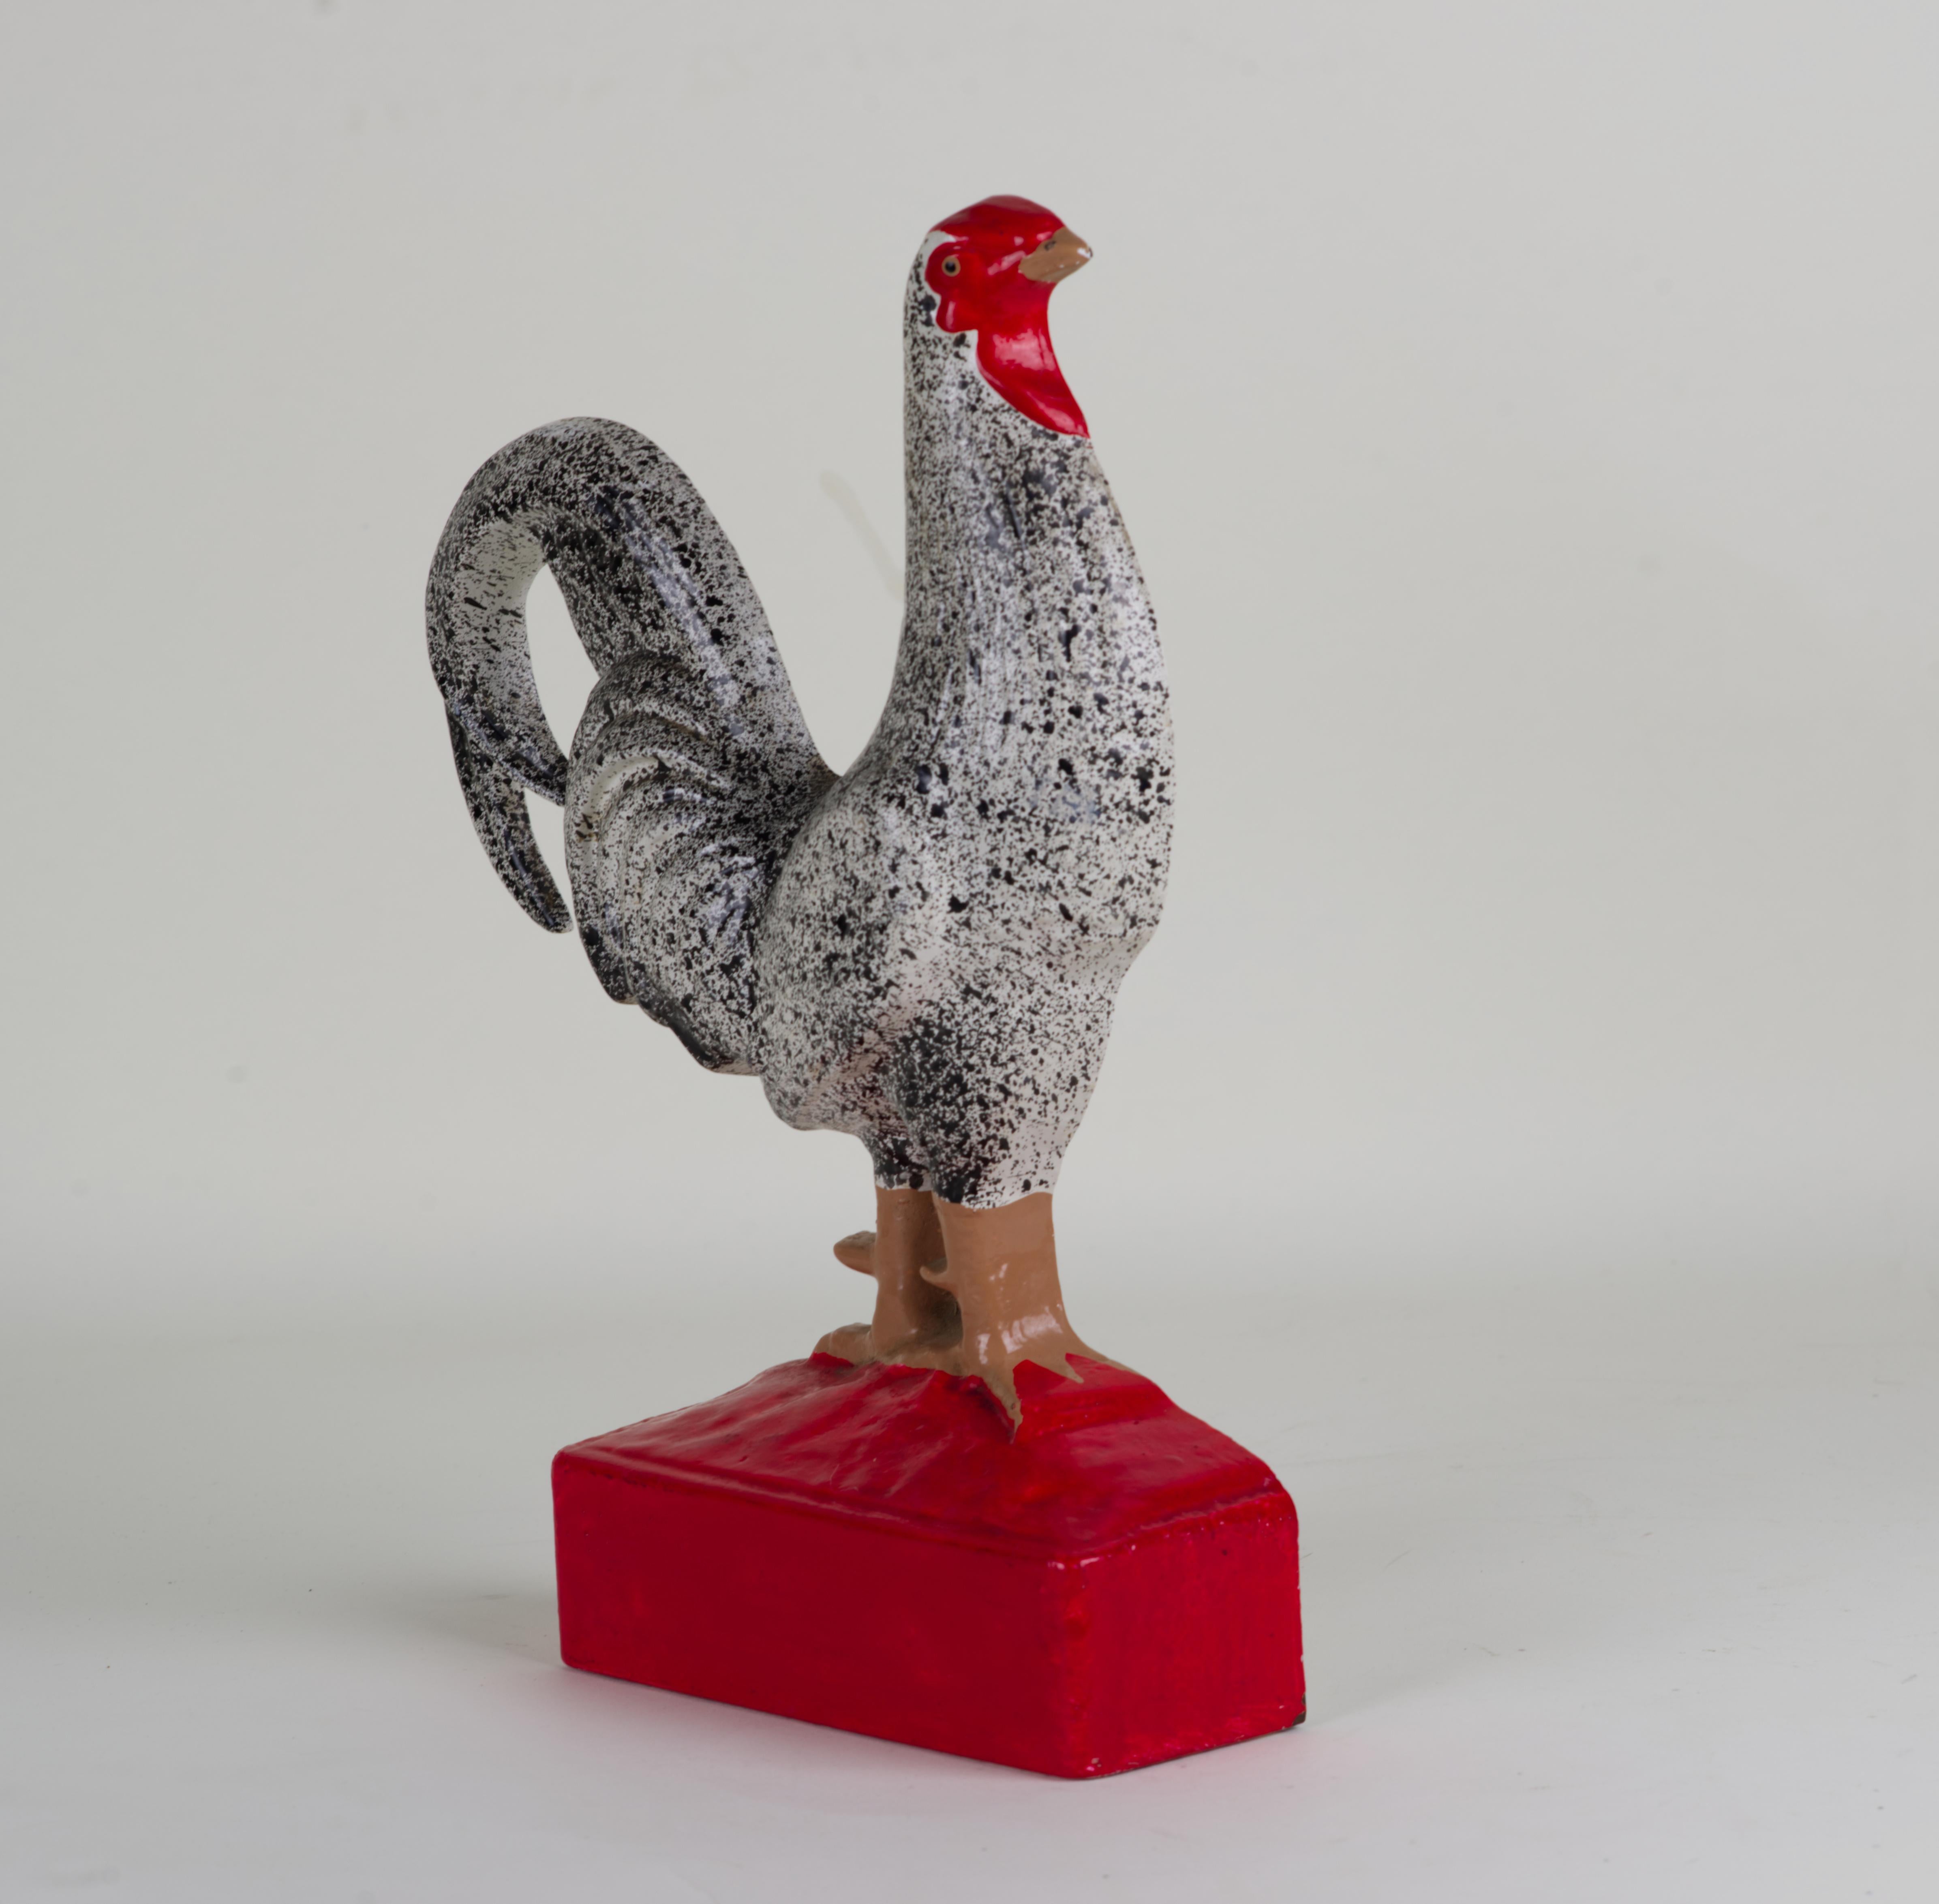 English Cast Iron Enameled Chicken Figurine, Decor or Doorstop, Vintage, England. For Sale